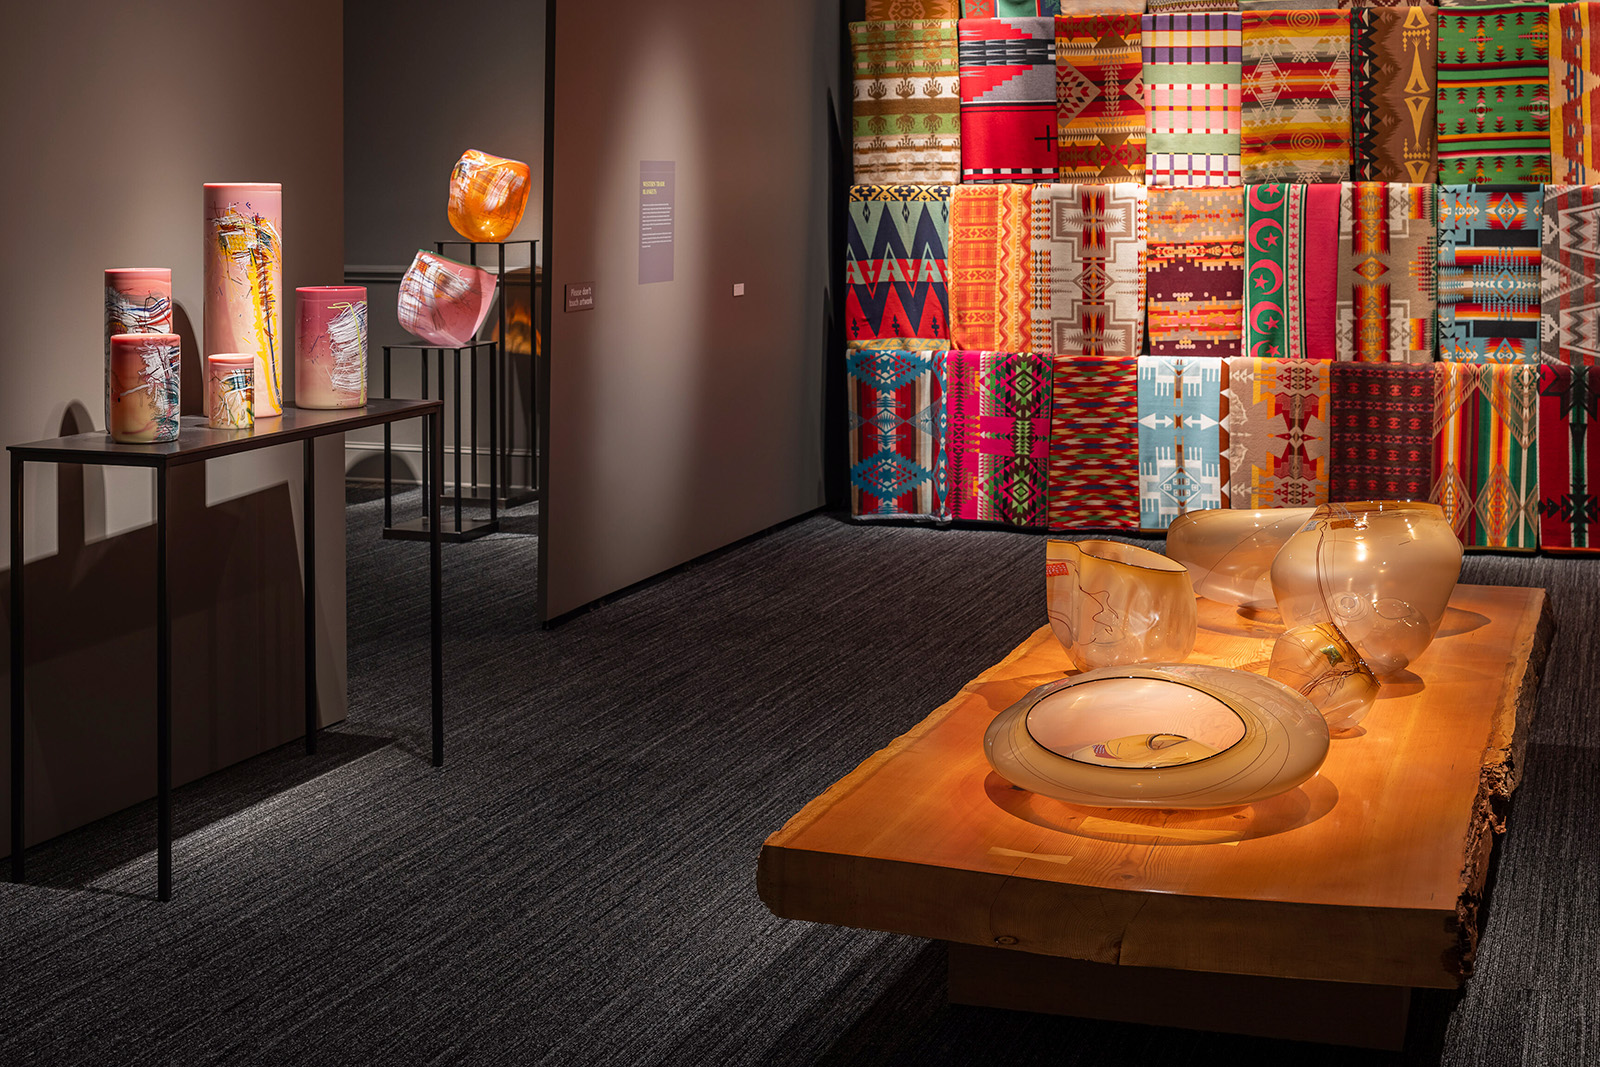 Chihuly, Tabac Baskets, 2017 with Western trade blankets, Soft Cylinders (detail), 2014, and Peach Cylinders with Indian Blanket Drawings